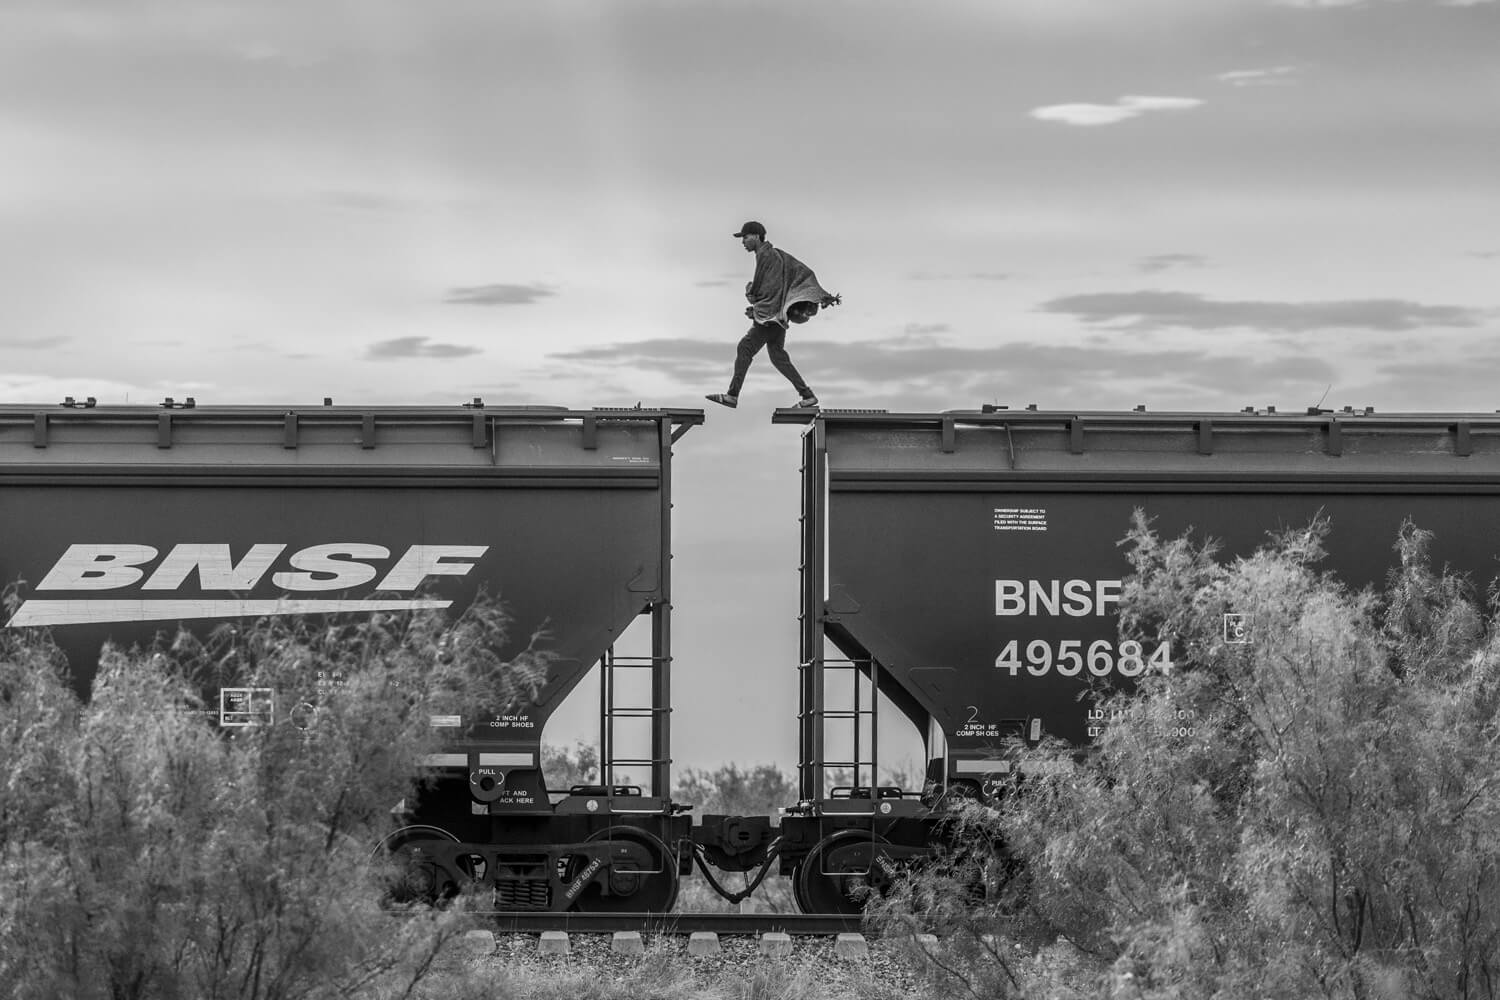 A man steps across the gap between freight train carts as he walks along the top of a train